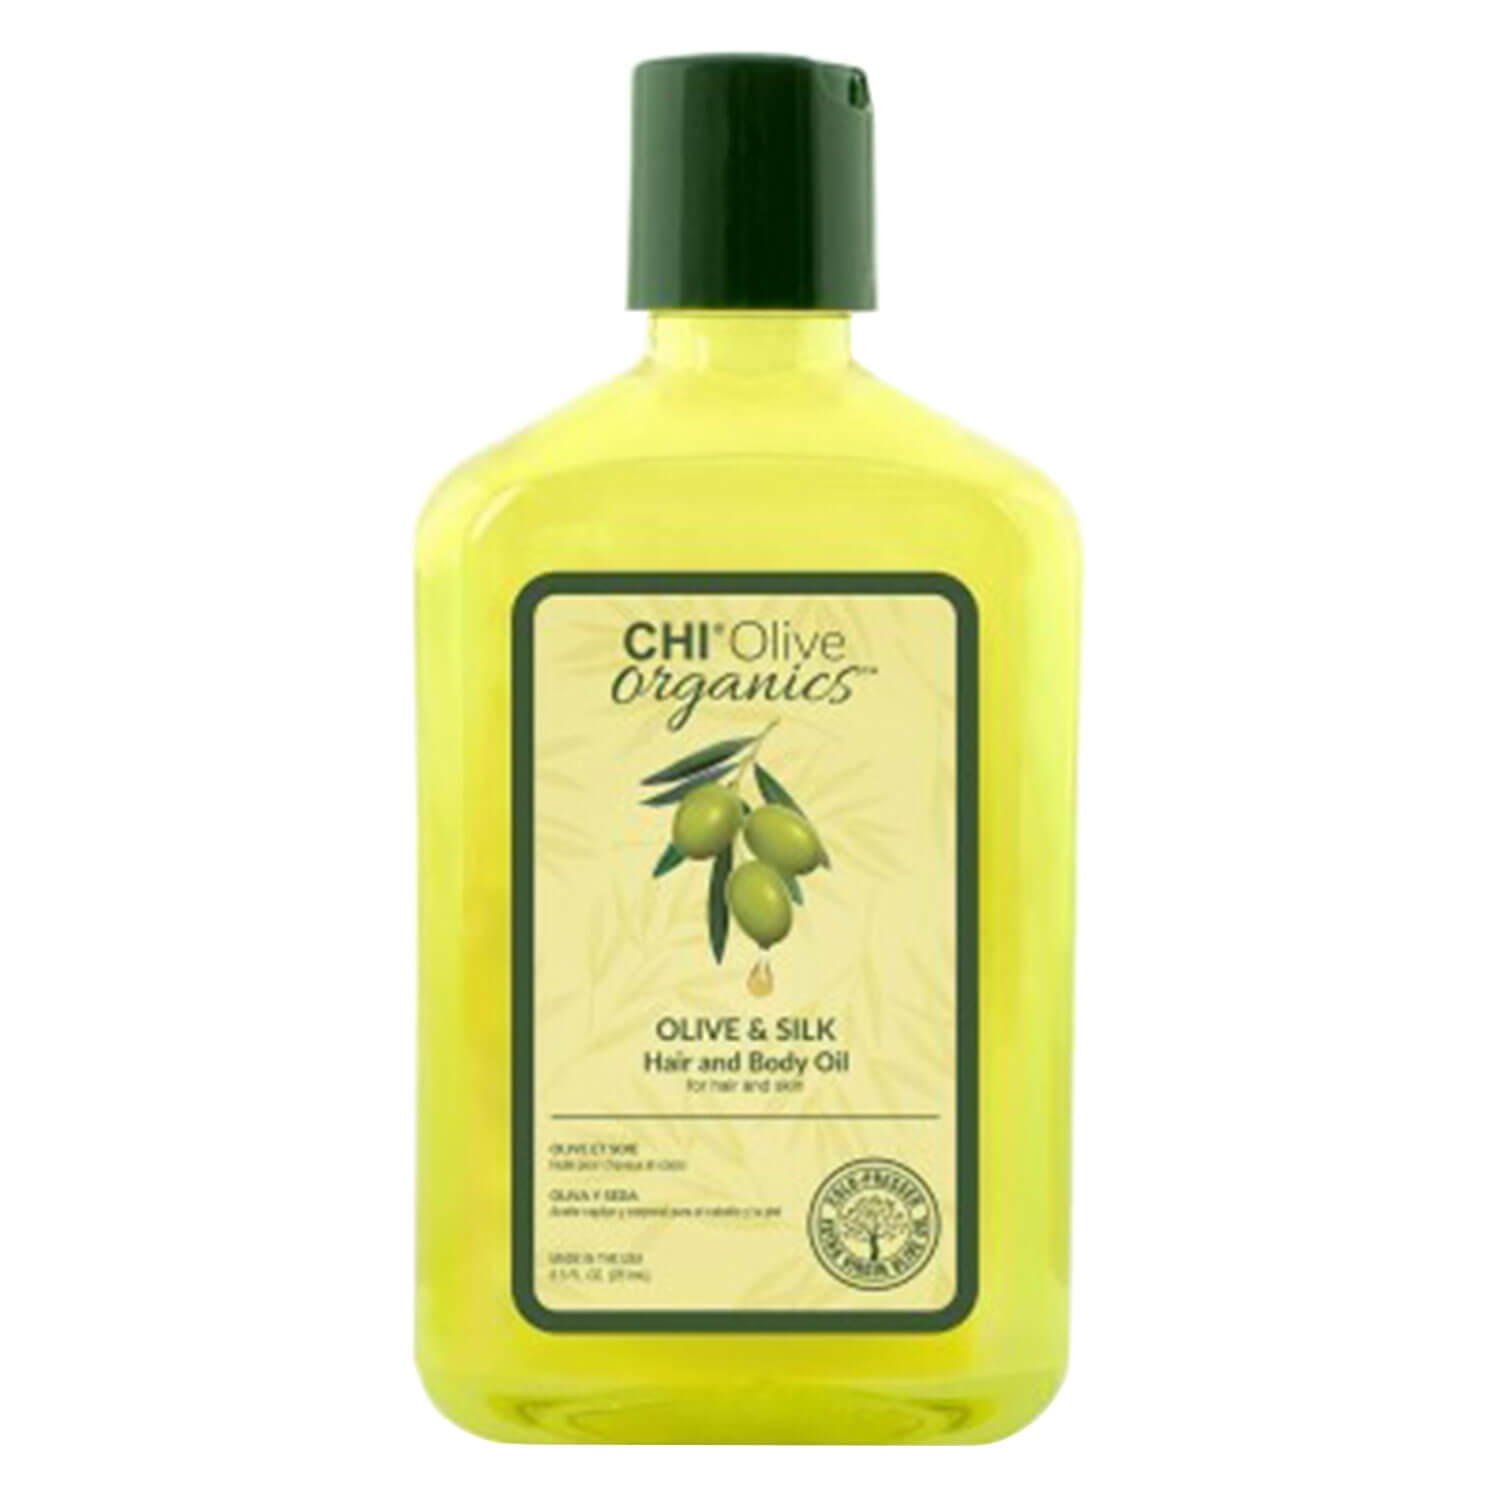 Product image from CHI Olive Organics - Hair & Body Oil